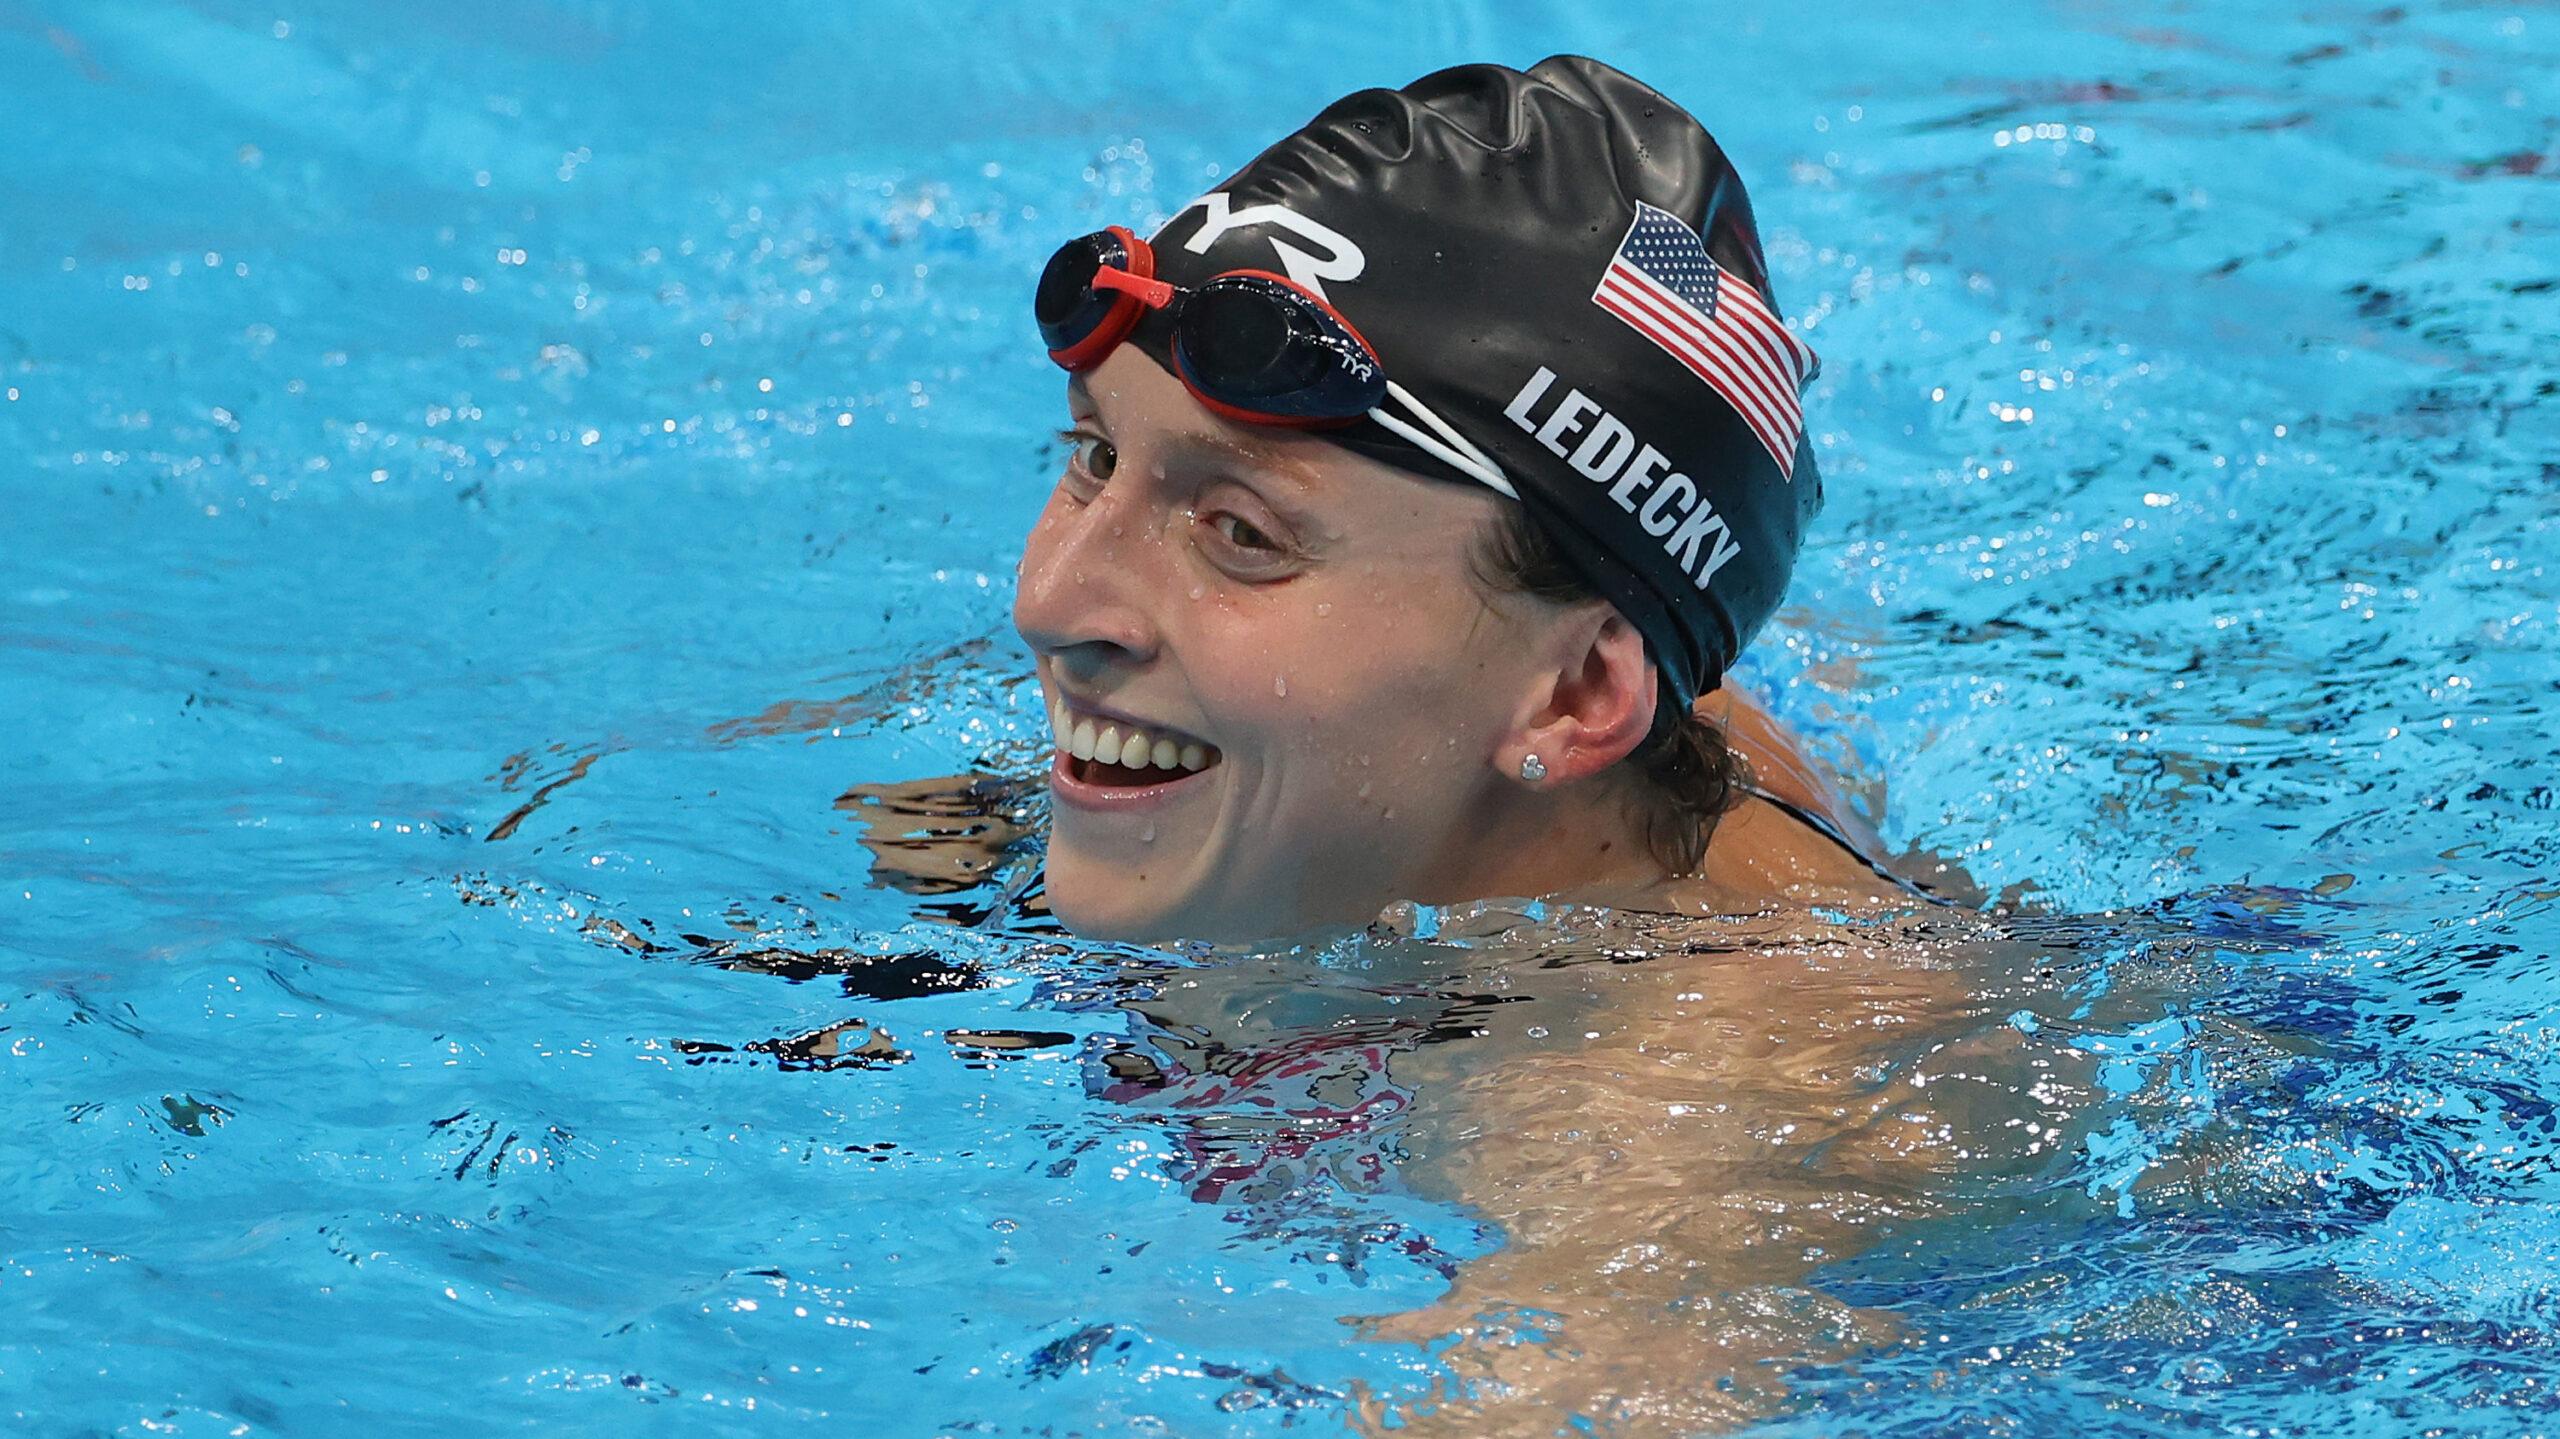 Usa S Katie Ledecky Three Peats And Wins Olympic Gold Again In